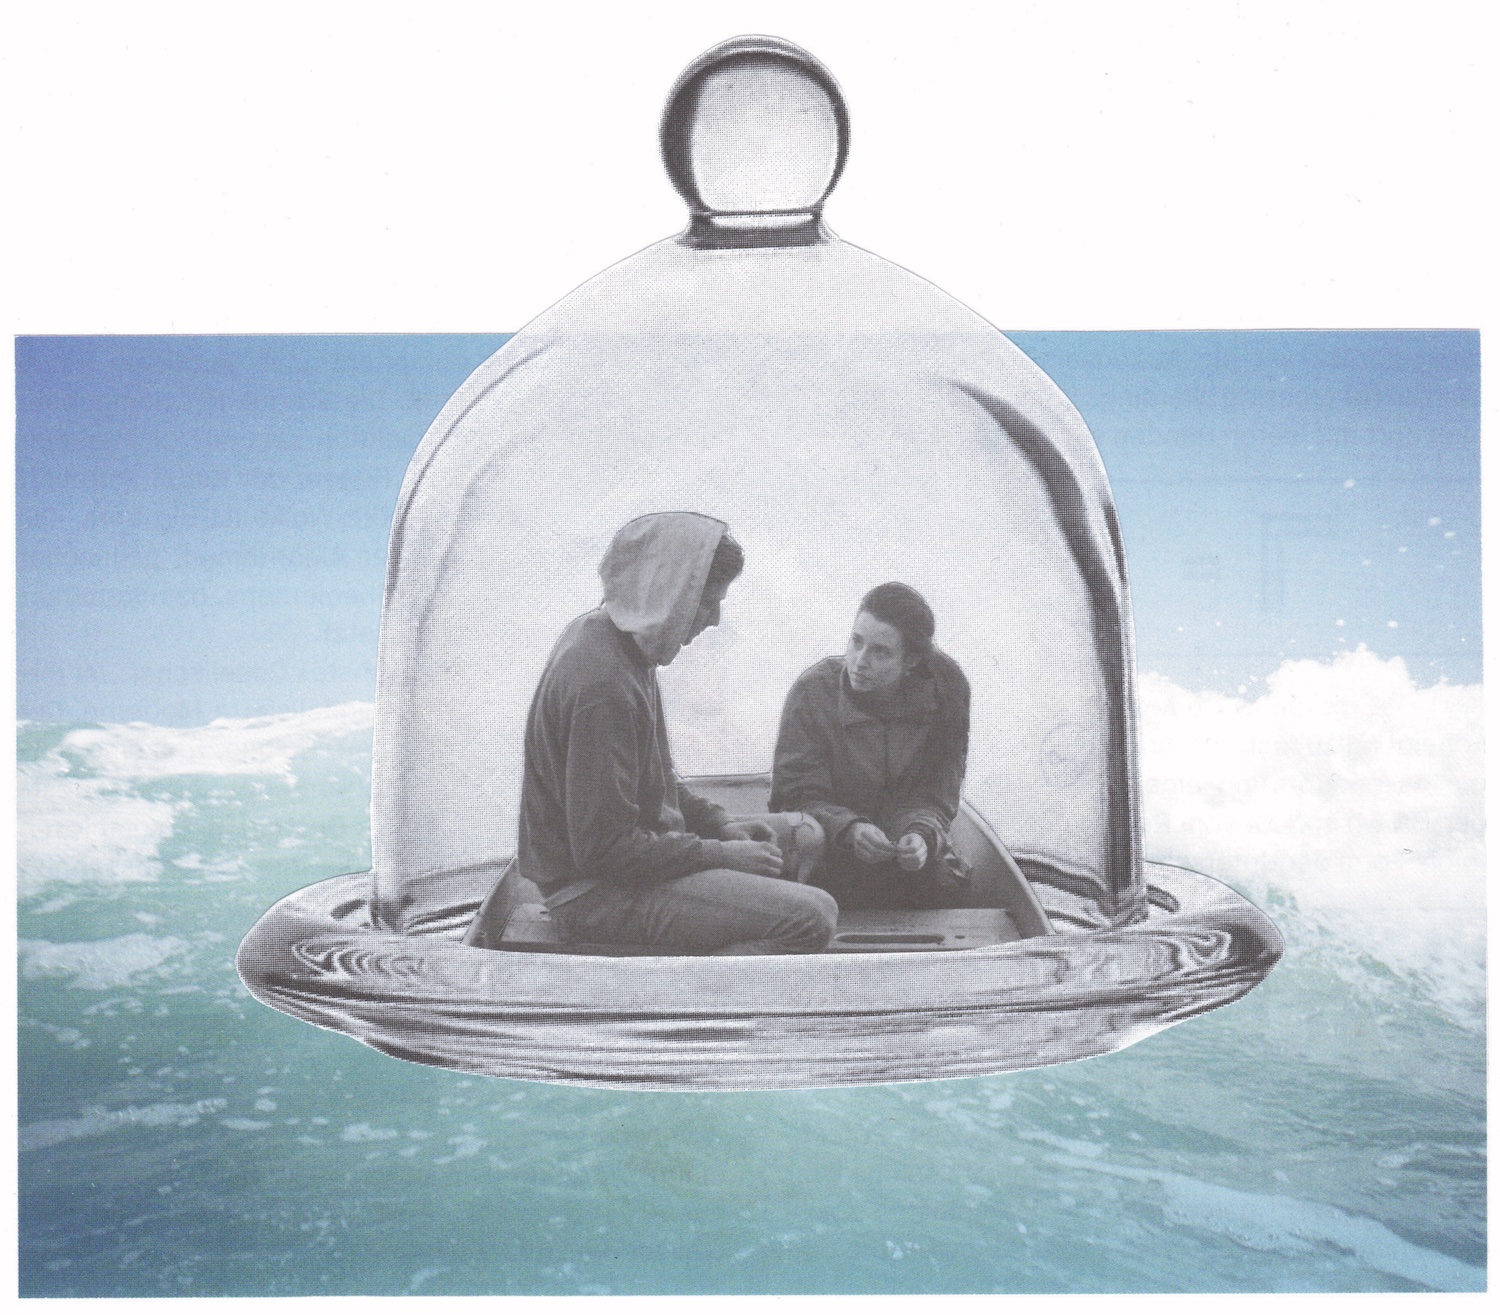 An image of two young people locked into an intense conversation with each other sits inside a glass dome. The image is in black and white but it floats across the rich turquoise of an ocean wave in the background.